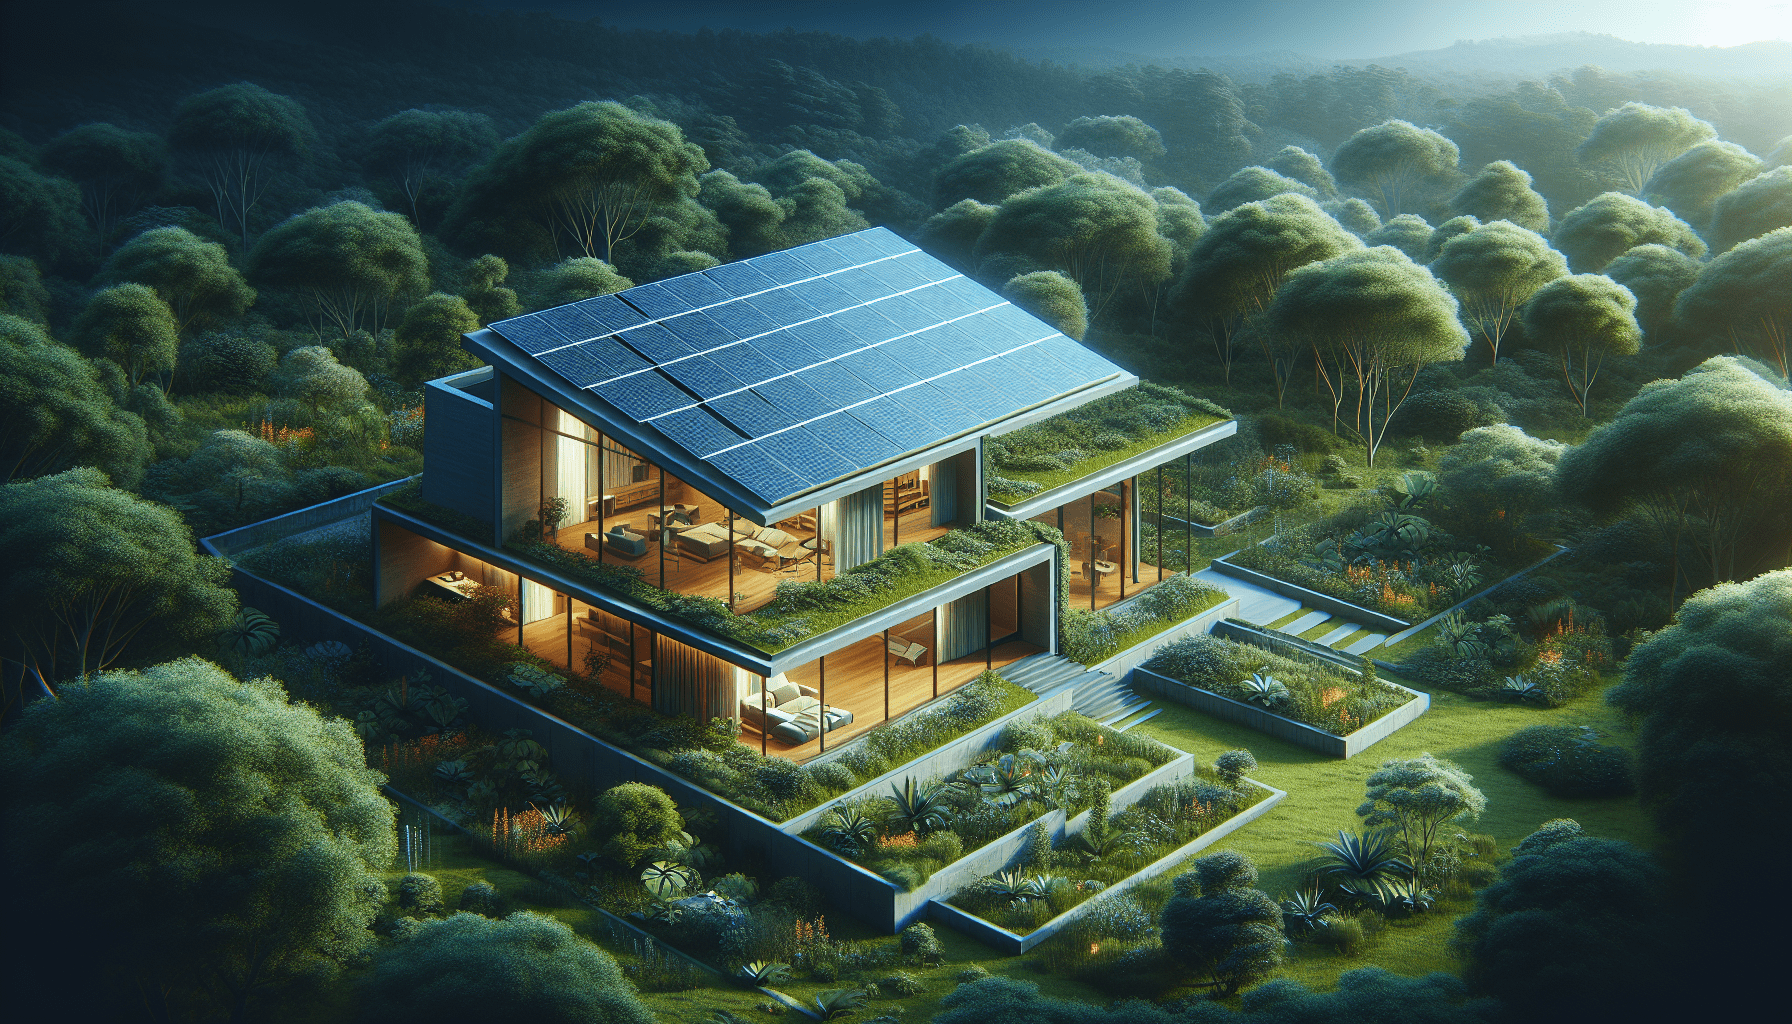 What Are The Benefits Of An Eco-friendly Home?